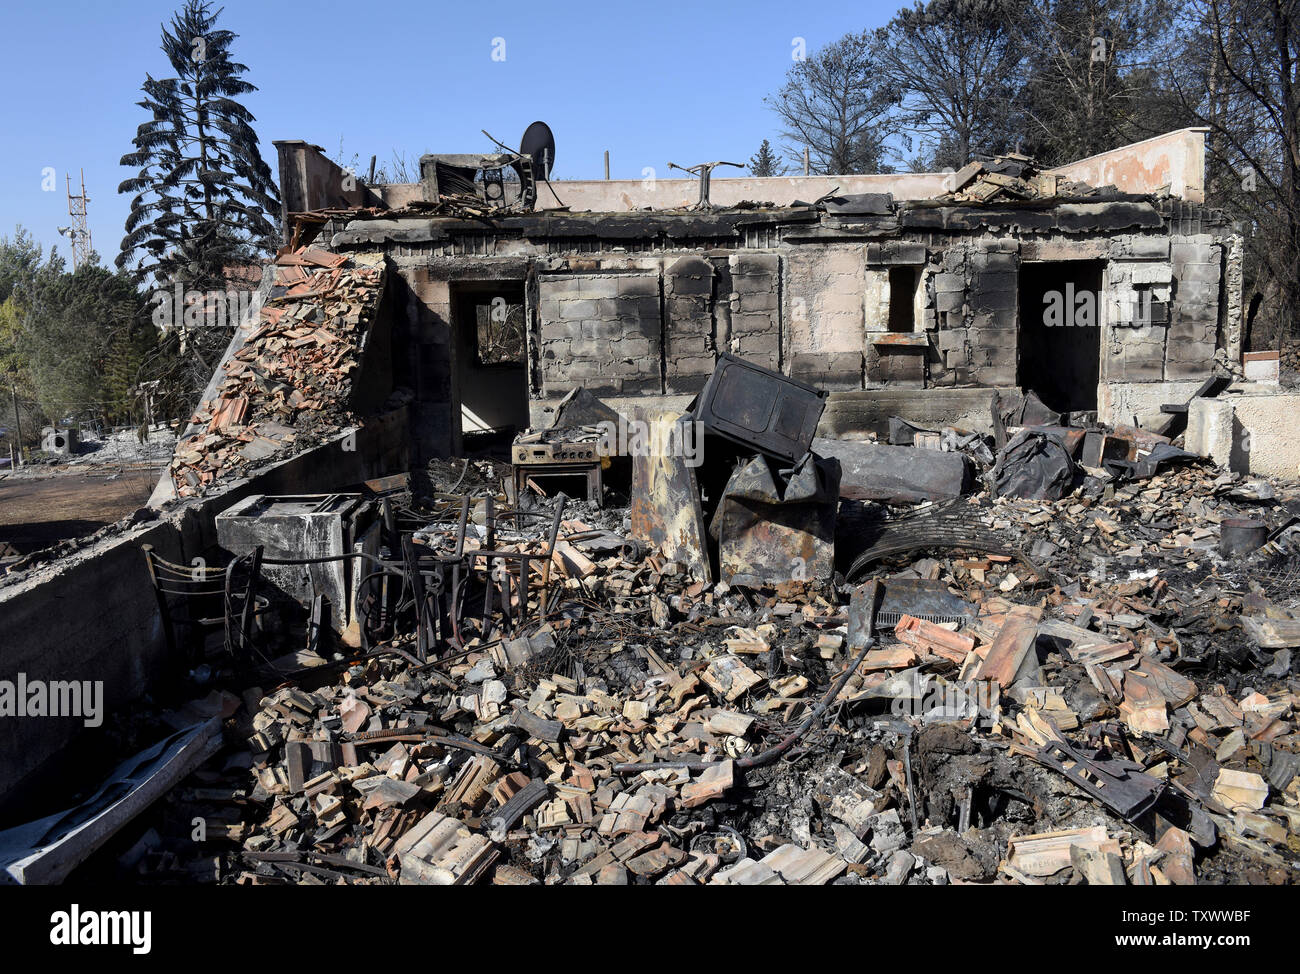 Ther charred remains of a house house destroyed by a fire stand in the Jewish settlement Hamalish in the West Bank, November 27, 2016. Several firebombs were found in the area of the settlement where forty-five homes were damaged and eighteen completely destroyed. More than a dozen suspects have been arrested for intentionally lighting fires that have ravished Israel and the West Bank. Israeli Prime Minister Benjamin Netanyahu and members of his hardline government have accused Palestinians of lightening the fires. Some 560 homes were burnt across the country while Palestinian firefighters joi Stock Photo